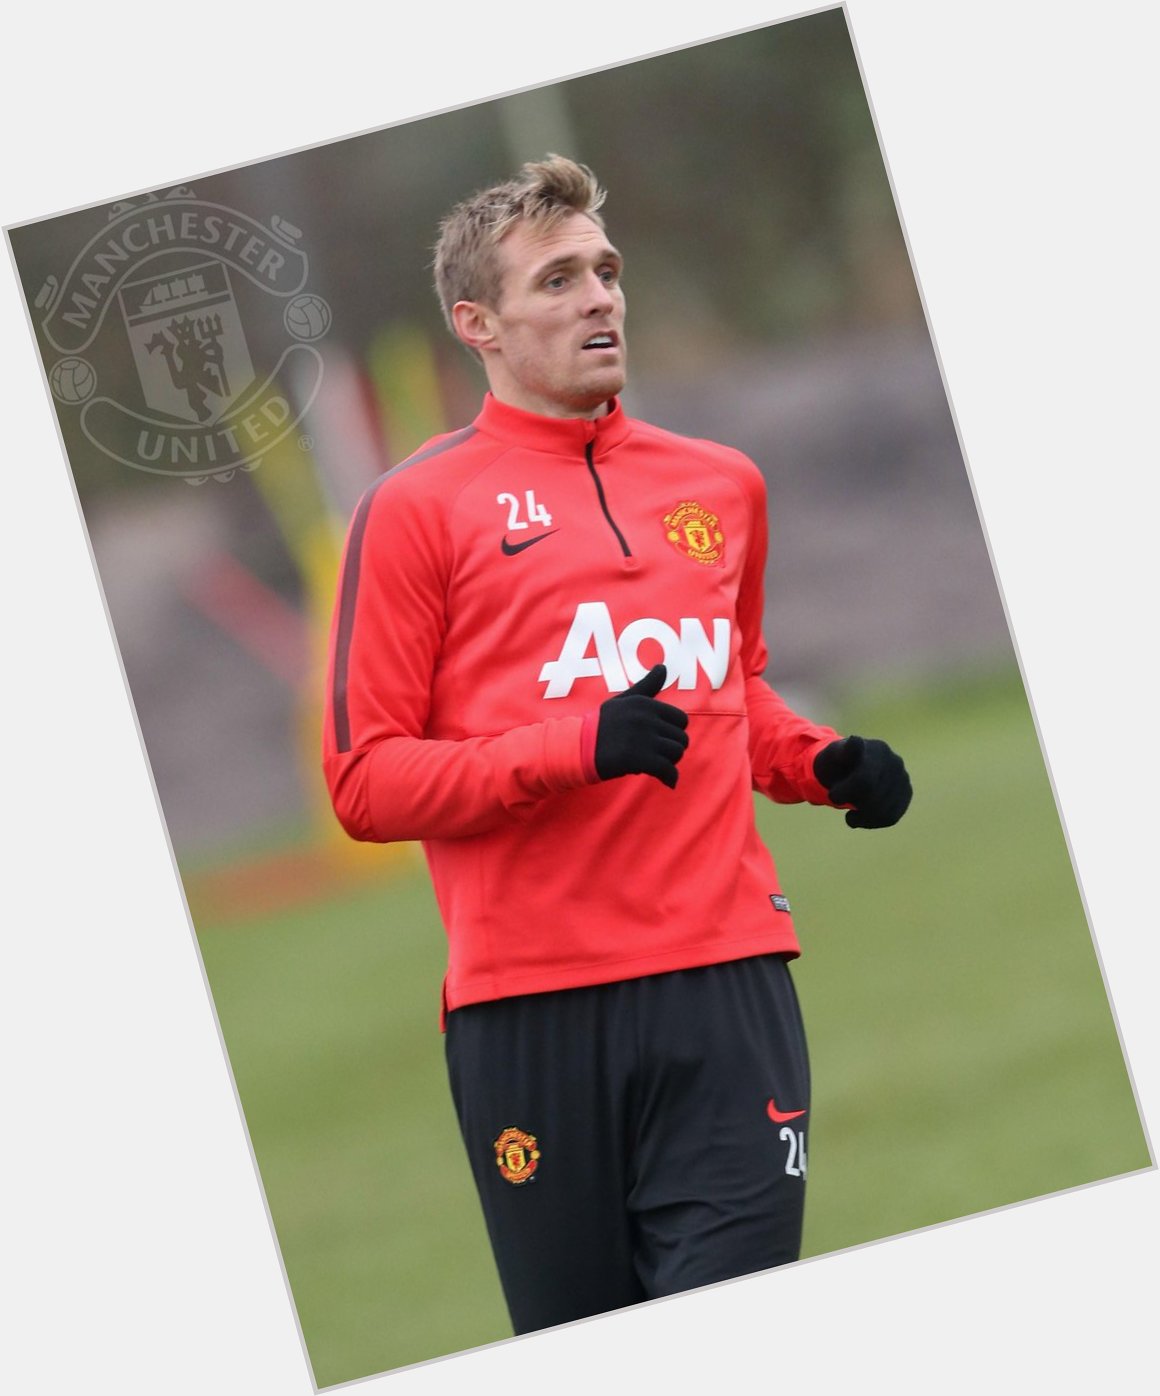 Happy birthday to Darren Fletcher from everyone at The midfielder is 31 today. 